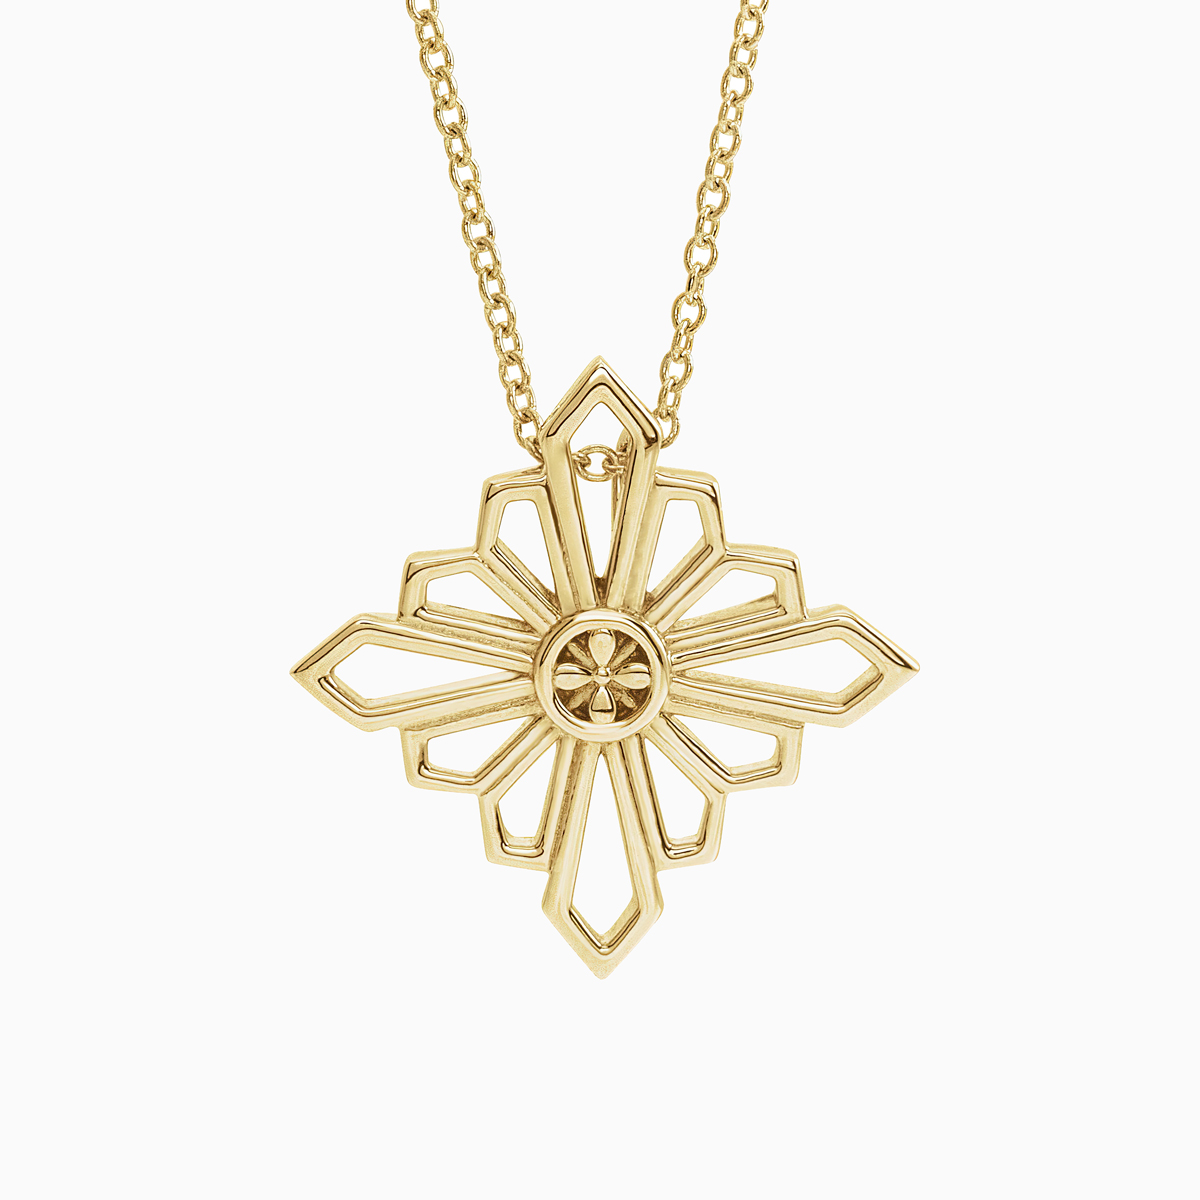 Vintage-inspired Geometric Necklace, 14k Yellow Gold